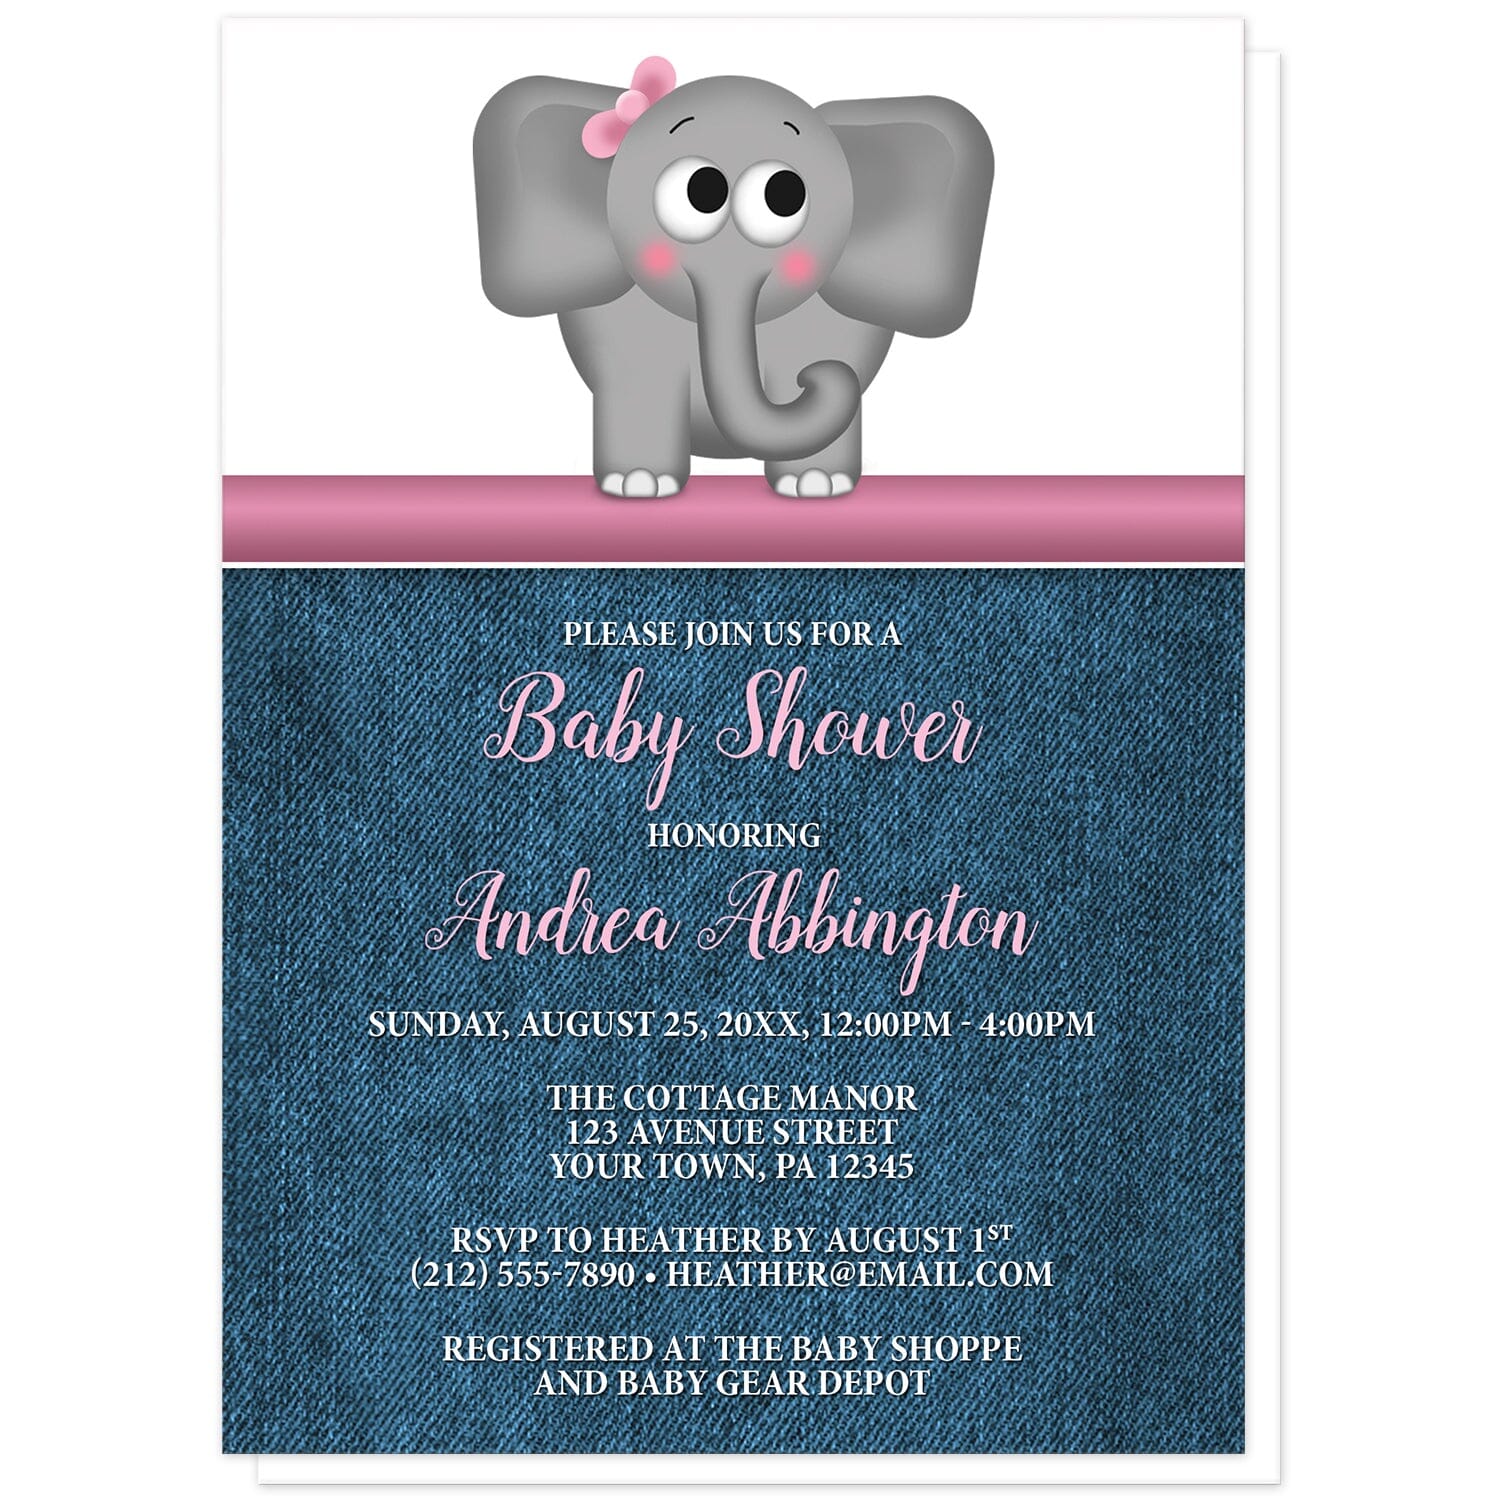 Cute Elephant Pink Rustic Denim Baby Shower Invitations at Artistically Invited. Cute elephant pink rustic denim baby shower invitations with an illustration of an adorable gray elephant wearing a pink bow. This cute little elephant stands on a horizontal pink stripe. The information you provide for your baby shower will be printed in pink and white over a rustic blue denim background. 